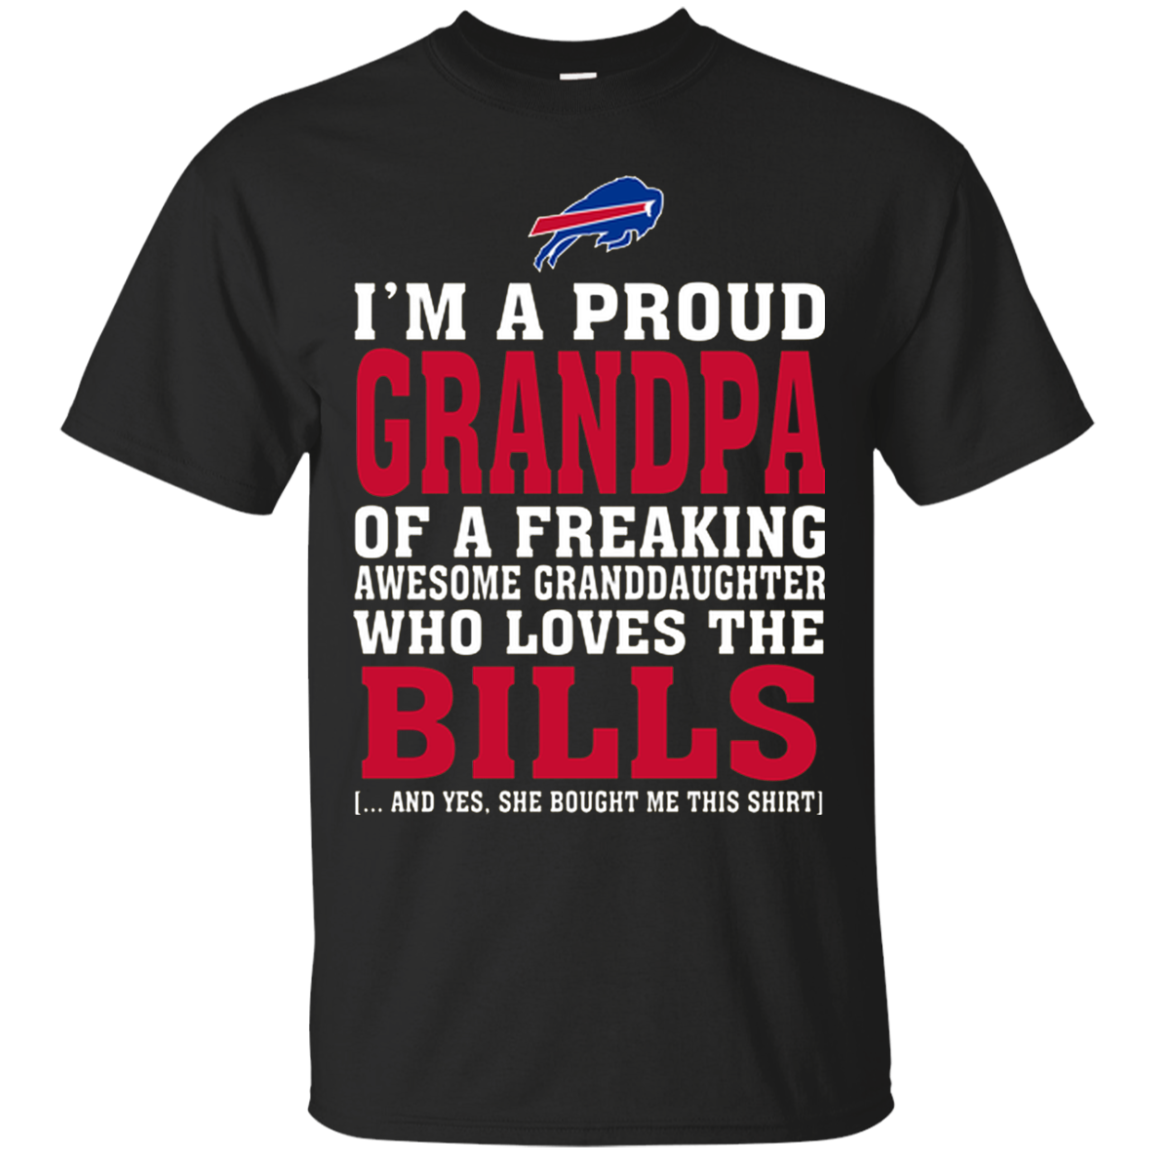 Iâ™m A Proud Grandpa Of A Freaking Awesome Granddaughter Who Loves The Bills Shirts